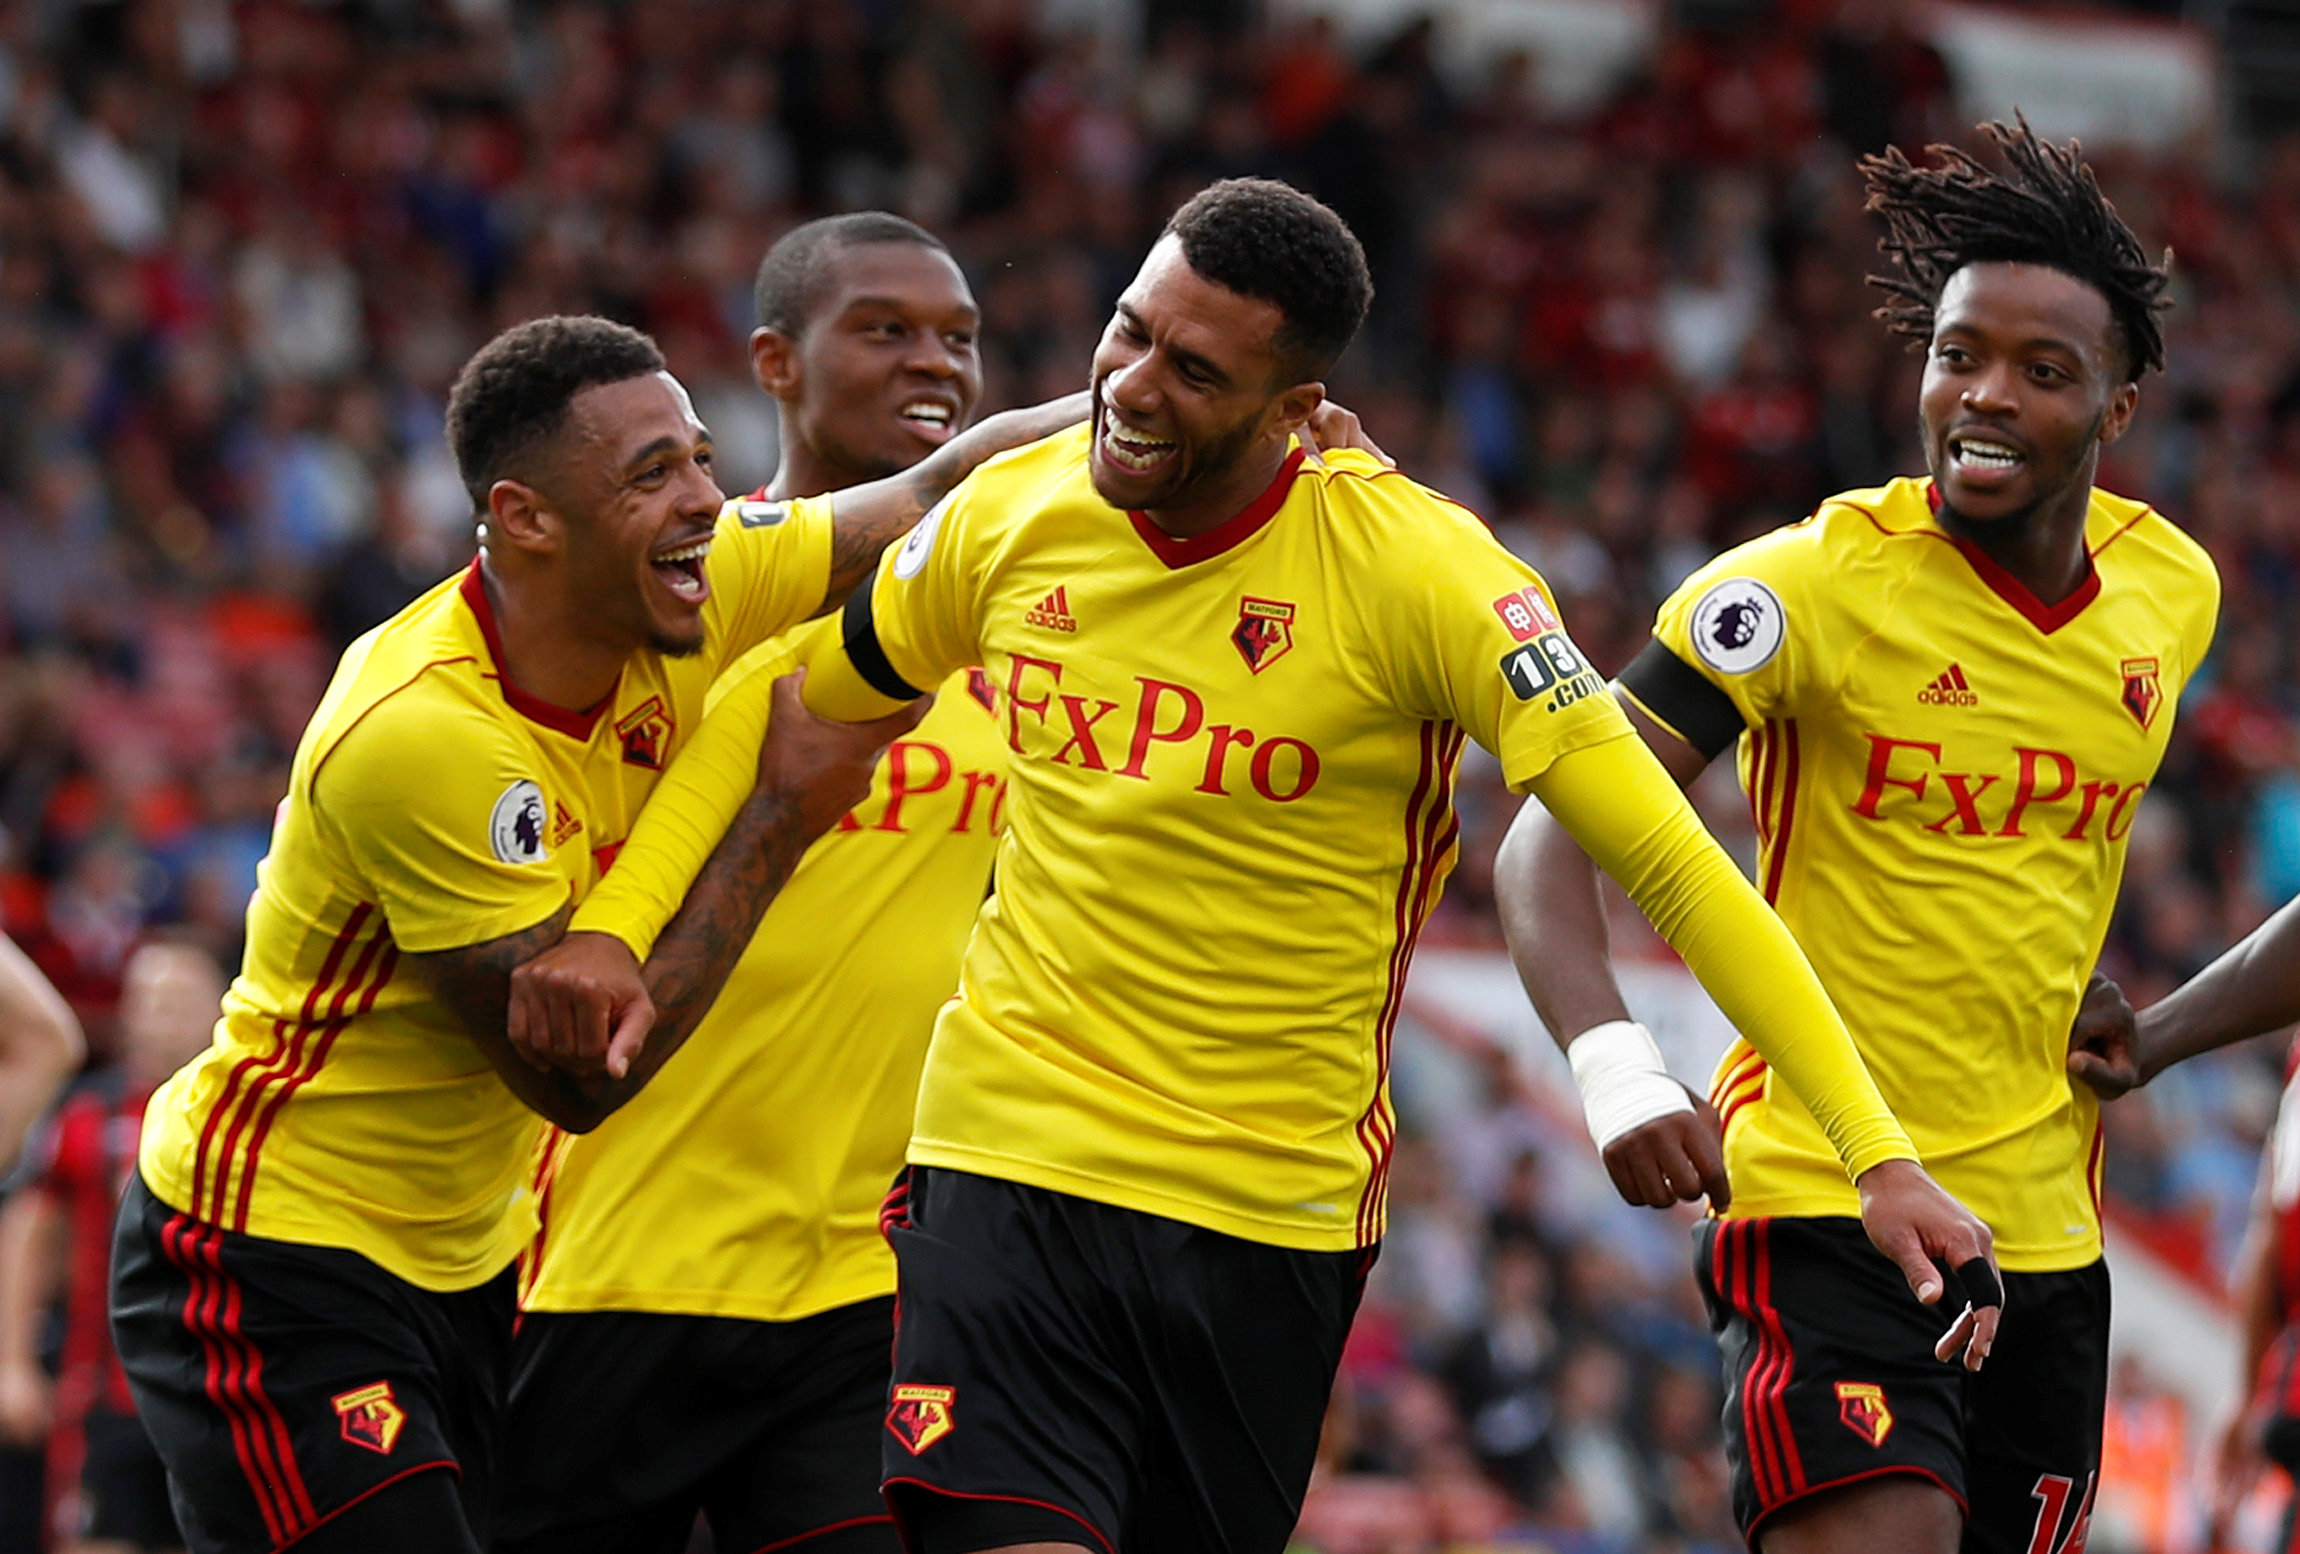 Football: Richarlison, Etienne Capoue lead Watford to win at Bournemouth